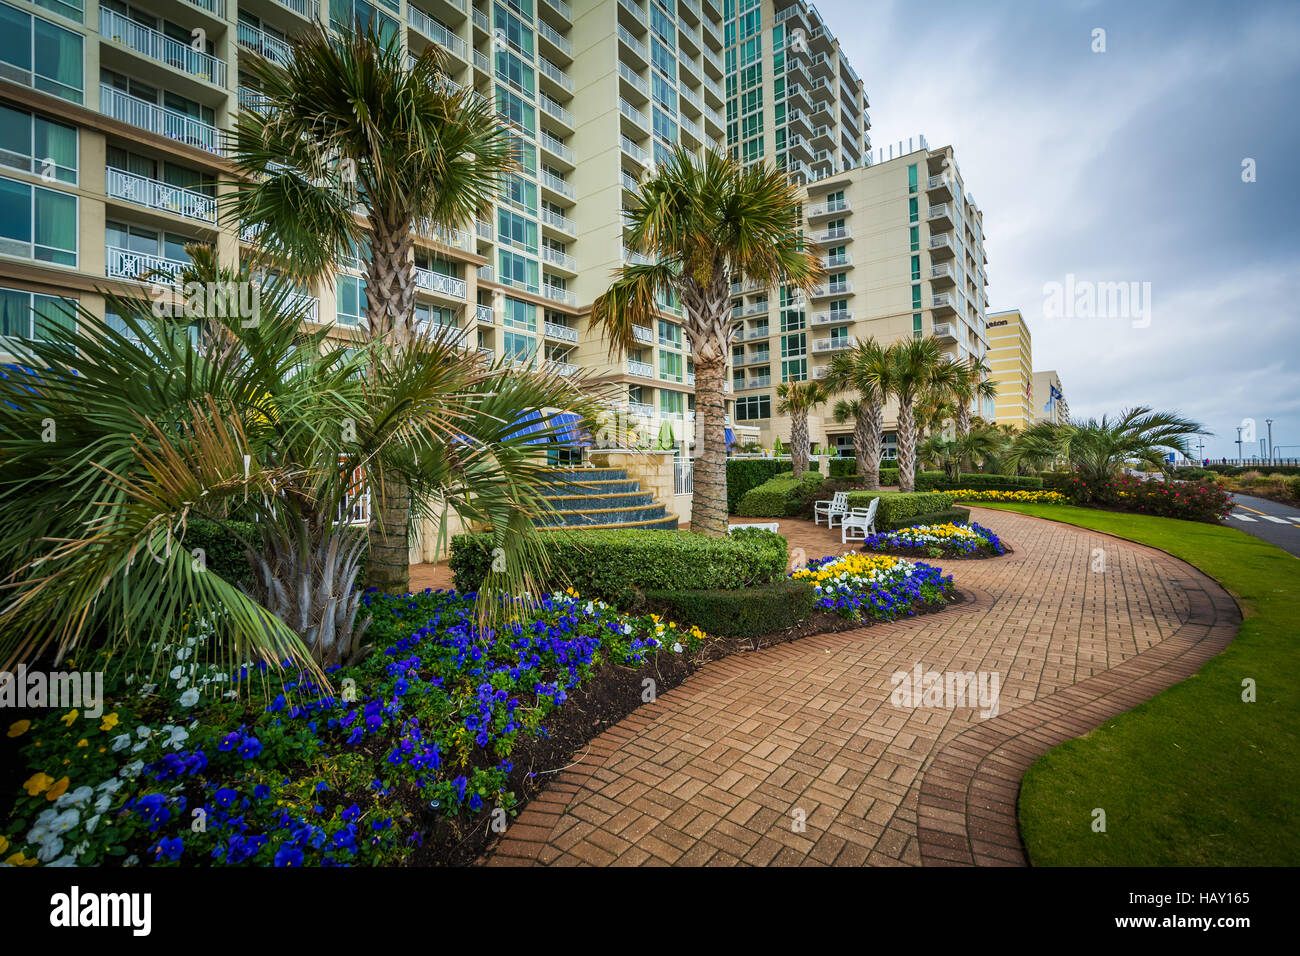 Palm trees, gardens and highrise hotels along the boardwalk in Virginia Beach, Virginia. Stock Photo